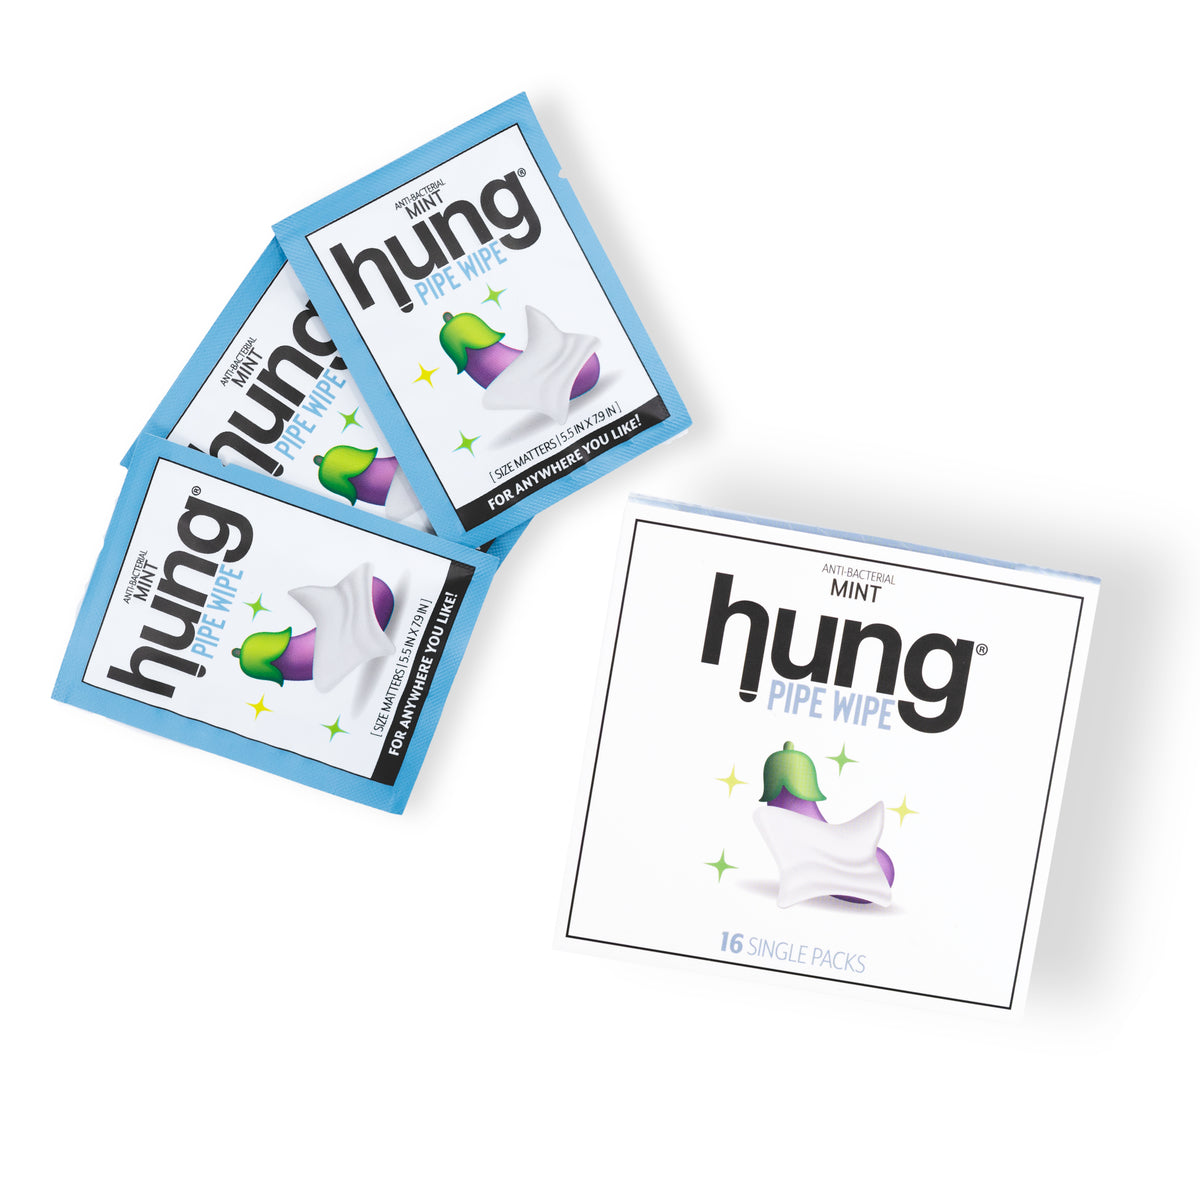 Hung Pipe Wipe 16 Count Box | Men's Refreshing Cleansing Towelette 